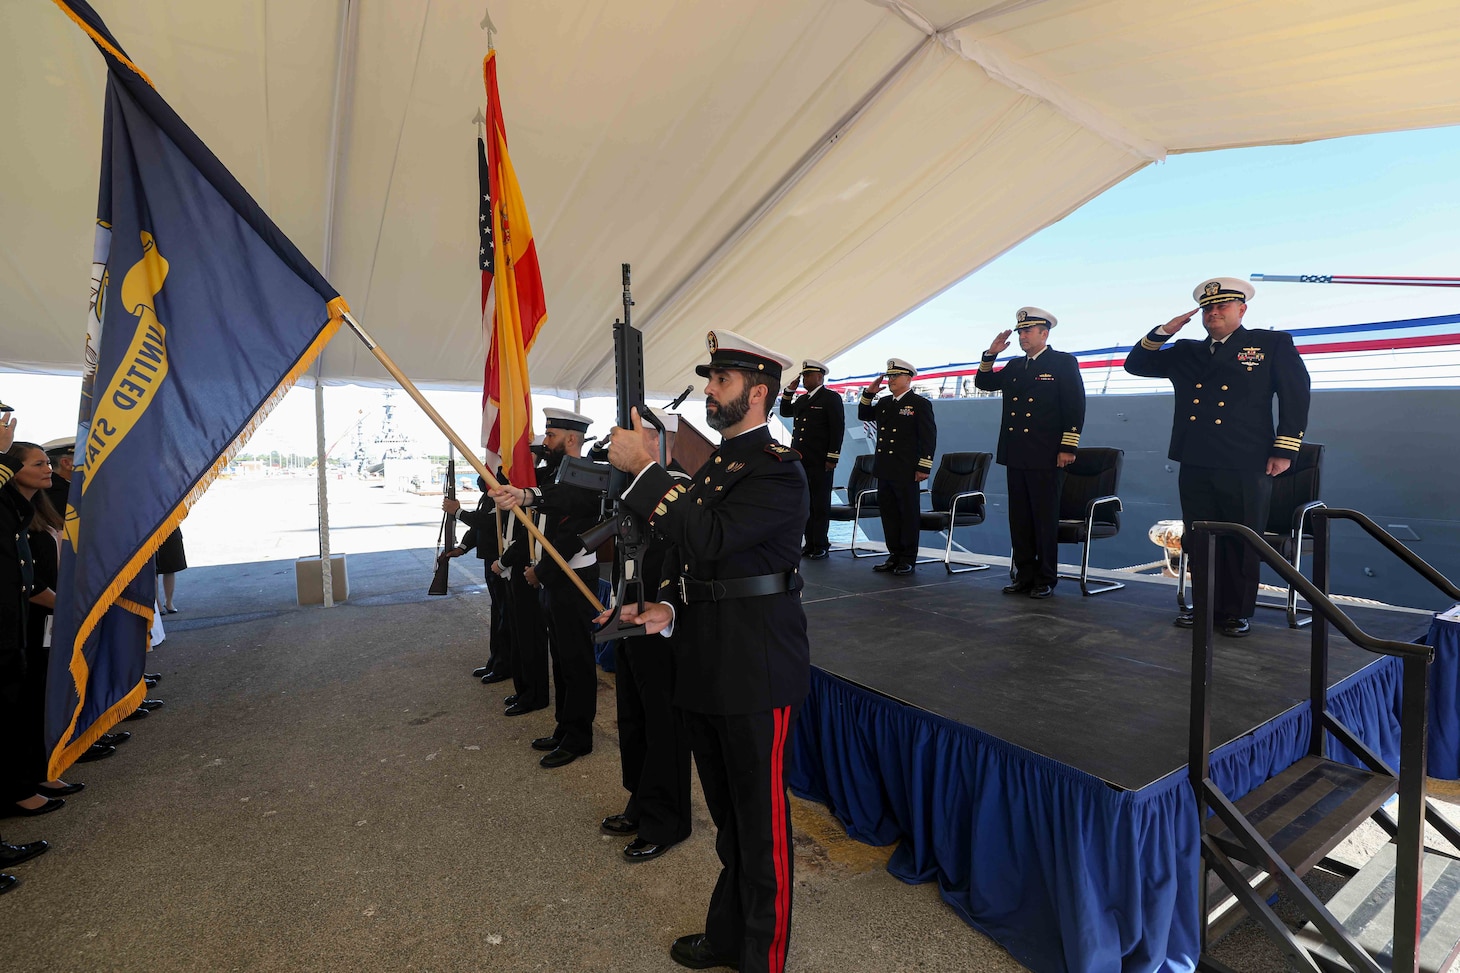 Porter Display and Africa Europe U.S. Naval Sixth of Holds Change News Ceremony > / USS Command Forces Fleet U.S. >